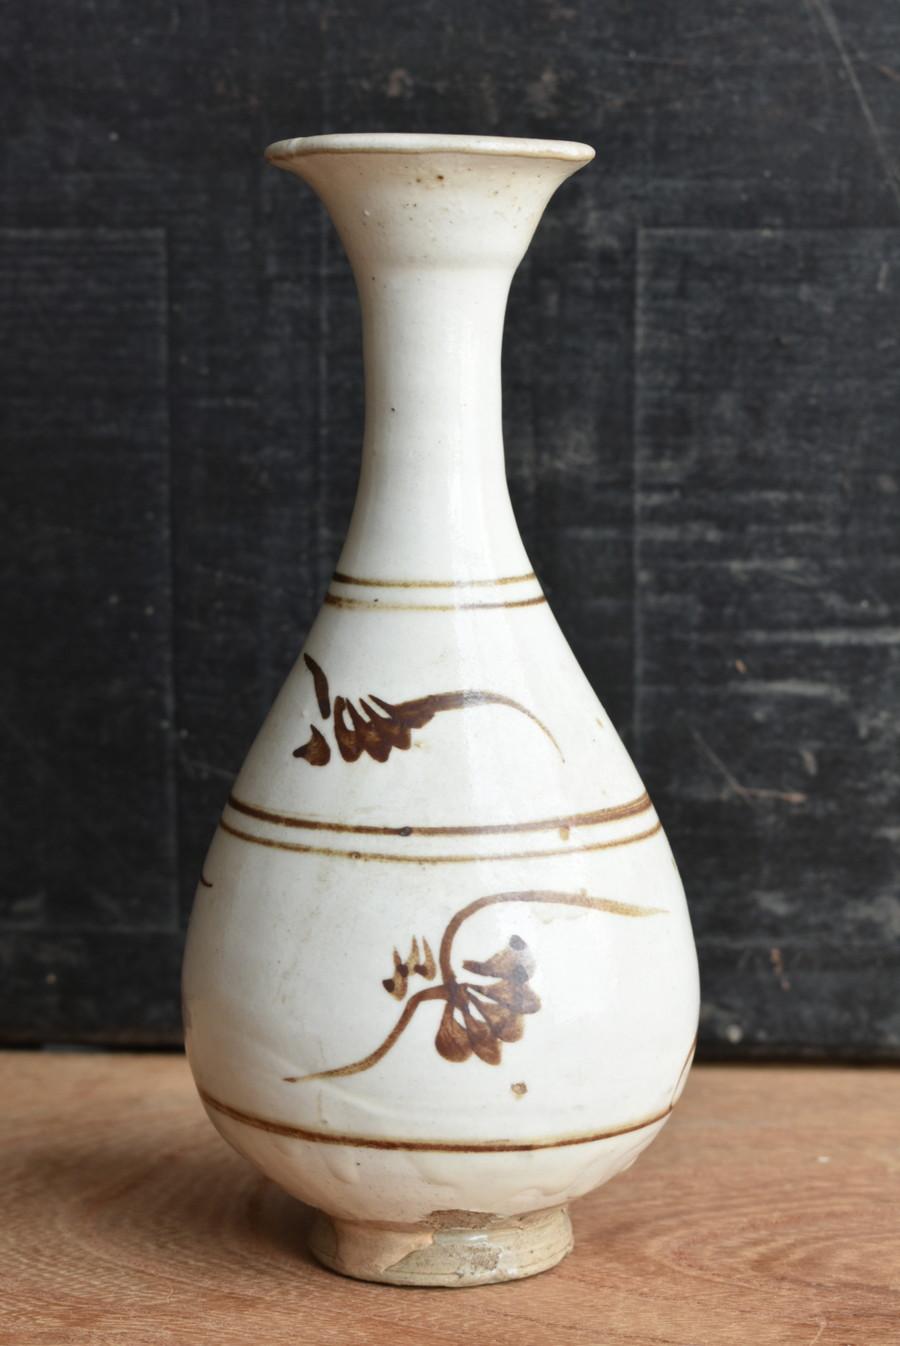 18th Century and Earlier Chinese Black and White Antique Pottery Vase/ Ming Dynasty /14th-15th Century